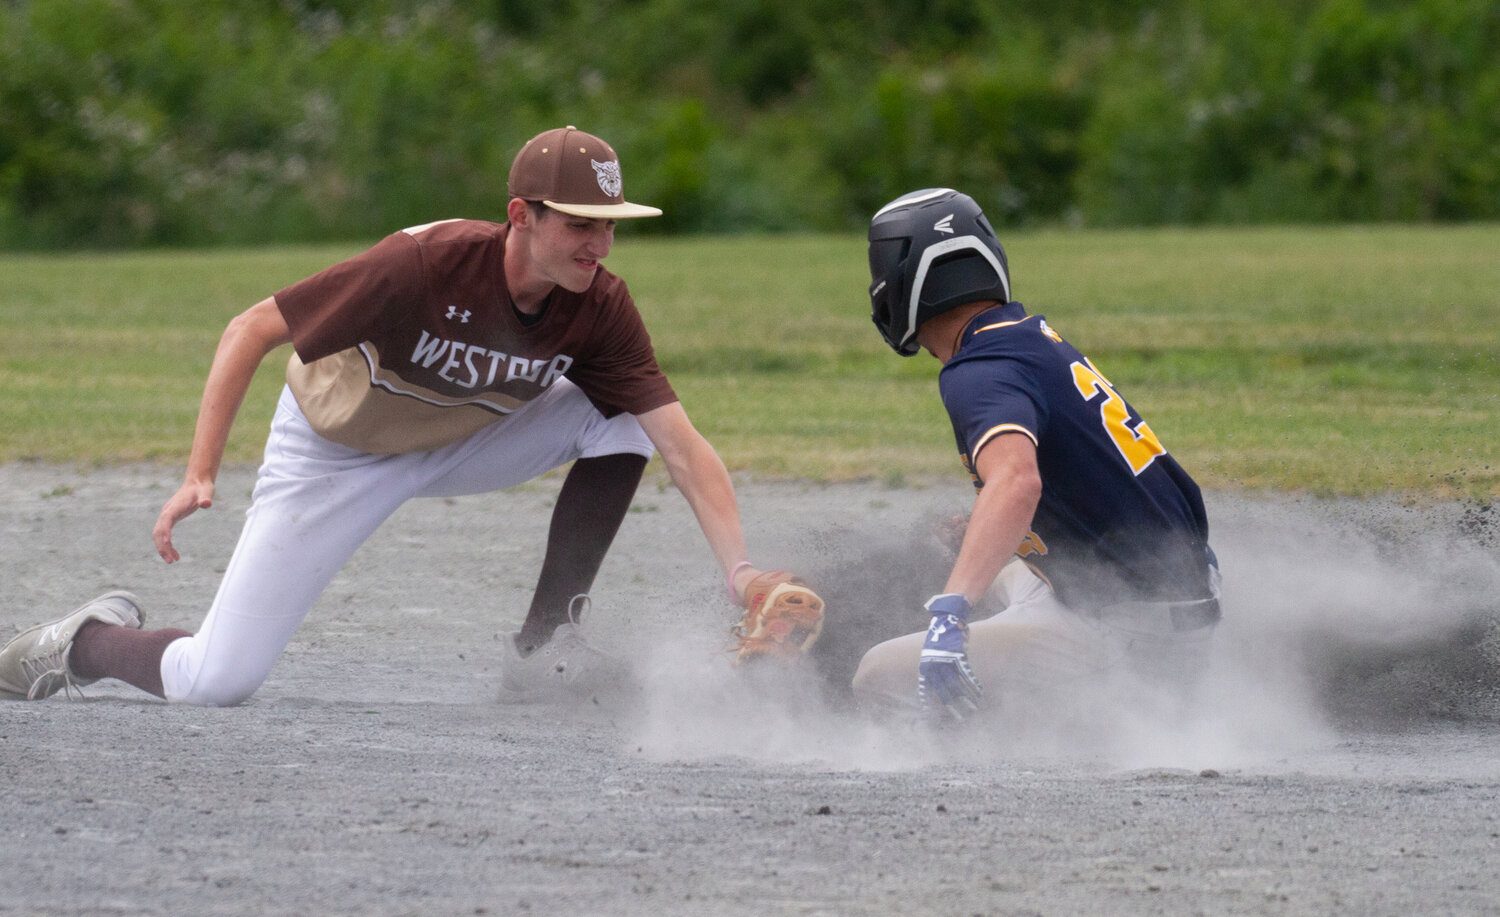 Second baseman Will Souza attempts to tag out a Mount Everett base runner stealing second base.